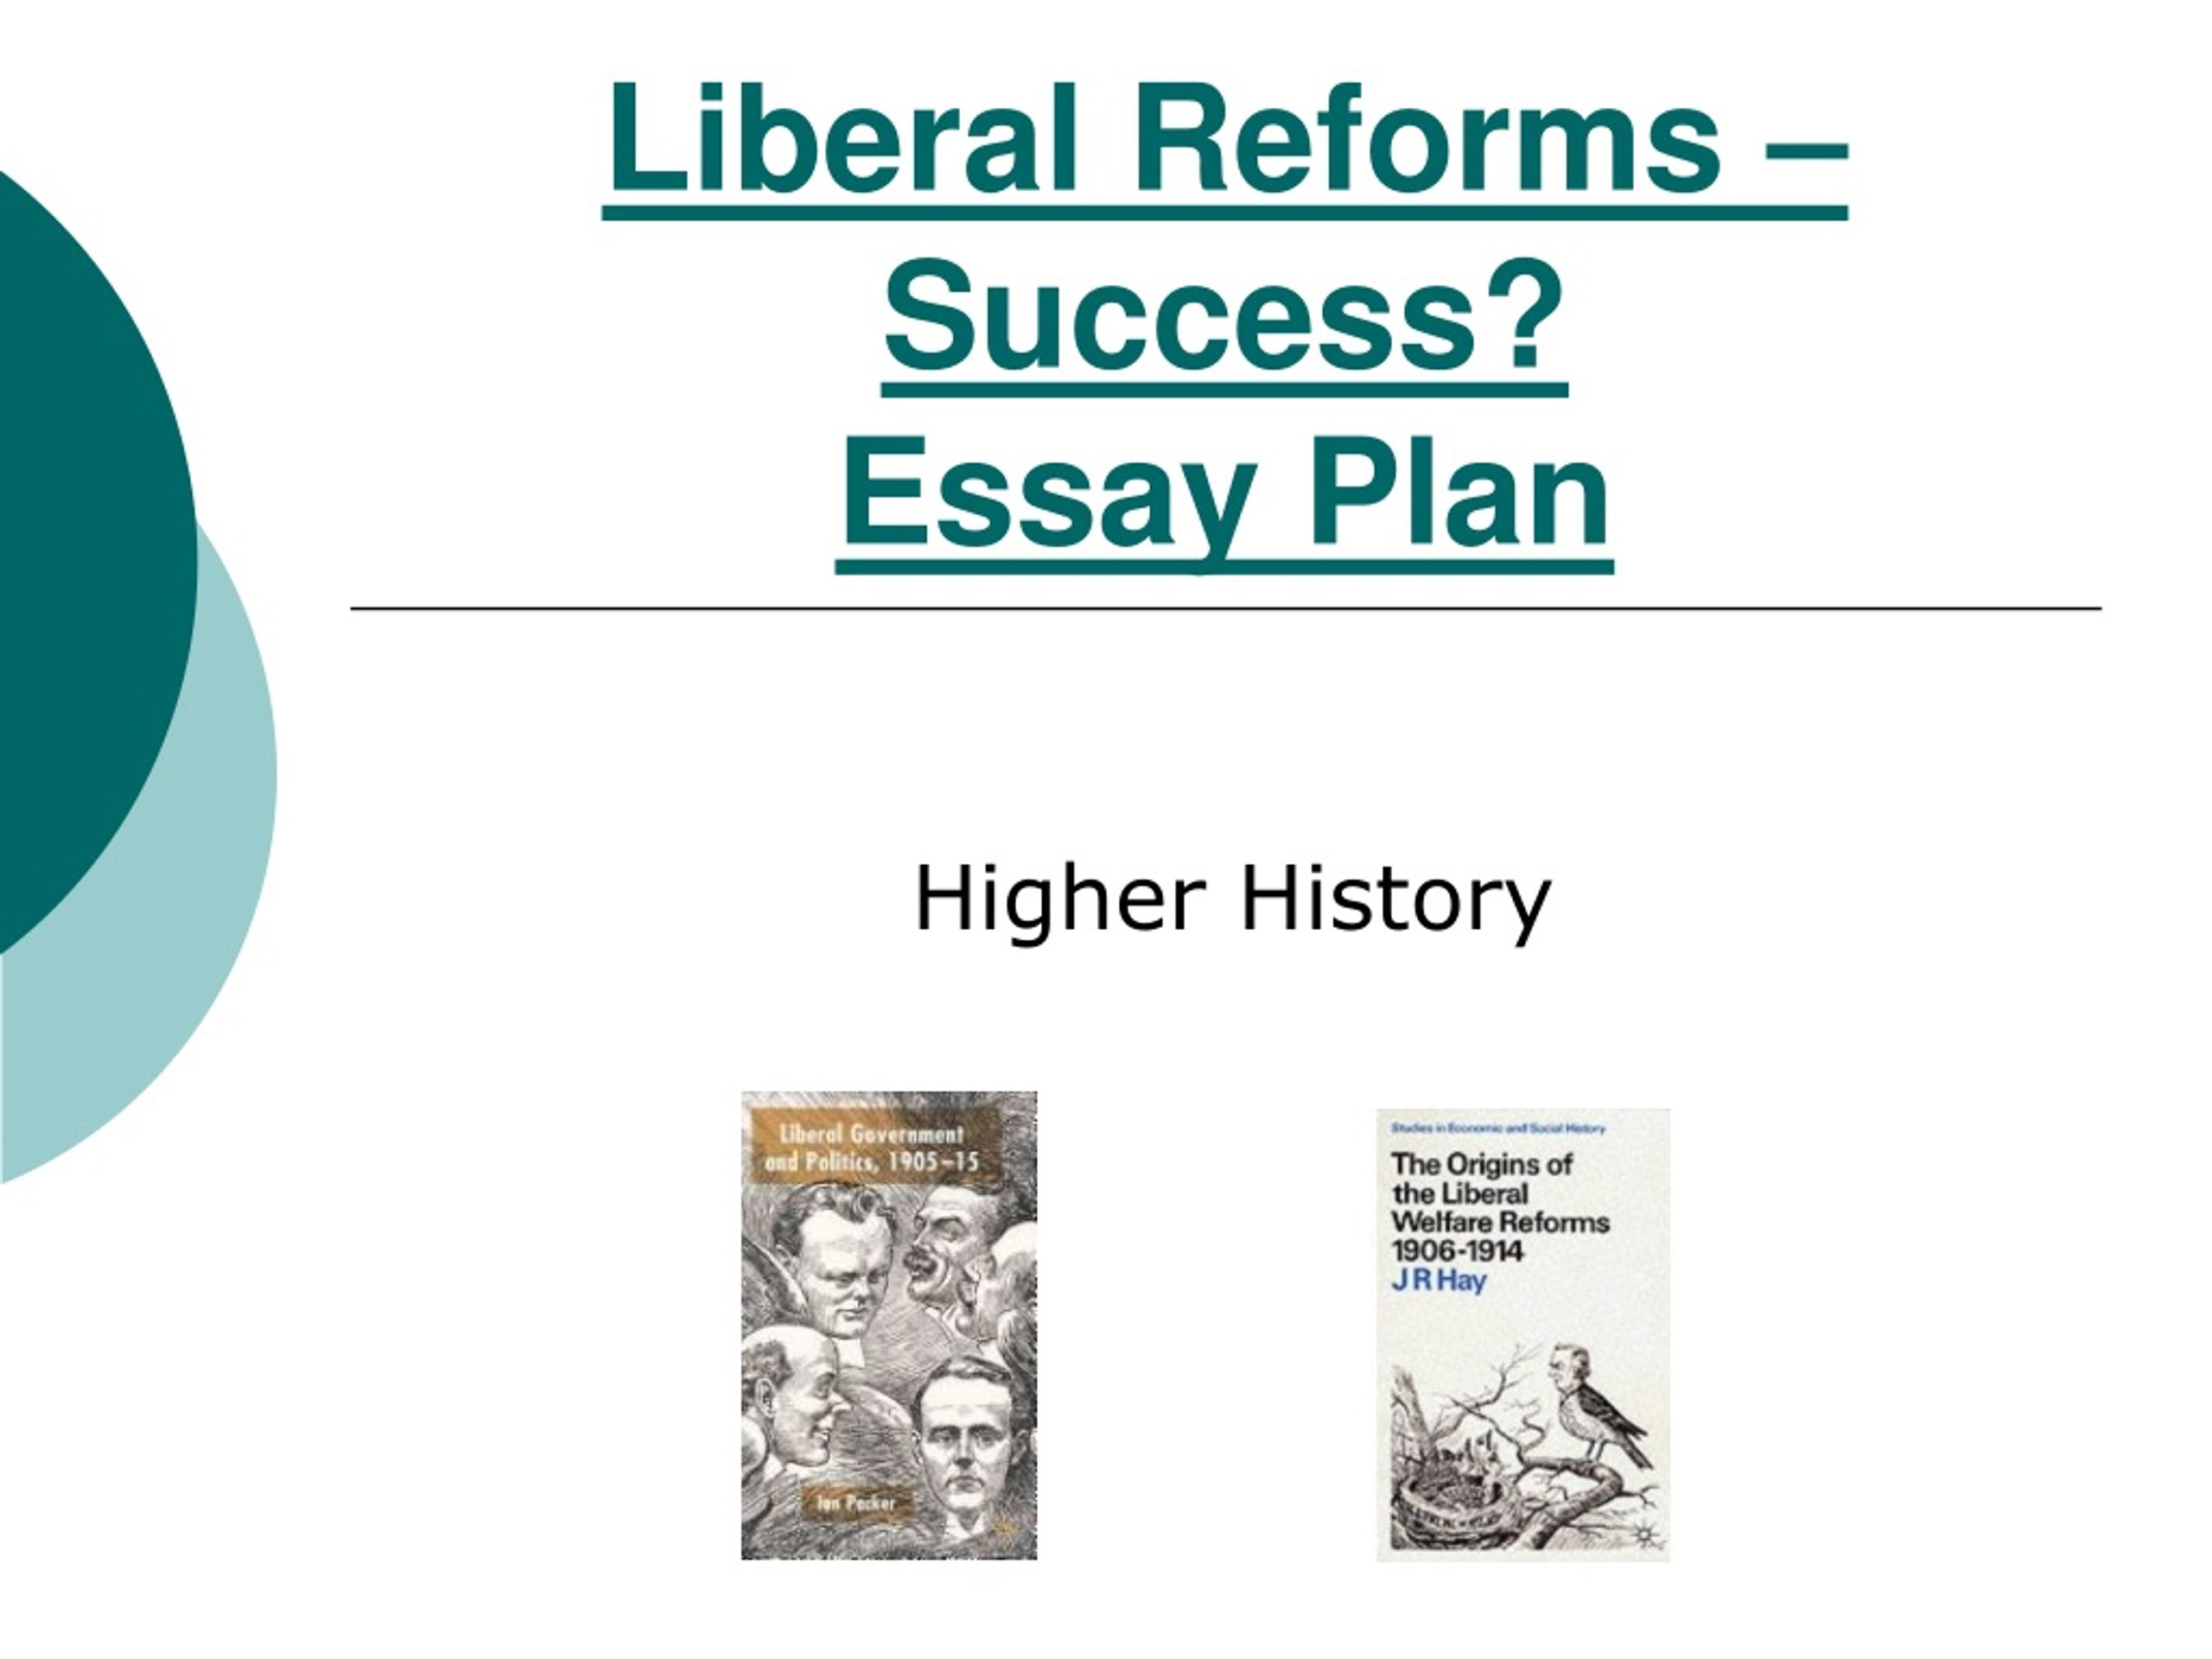 higher history essay liberal reforms